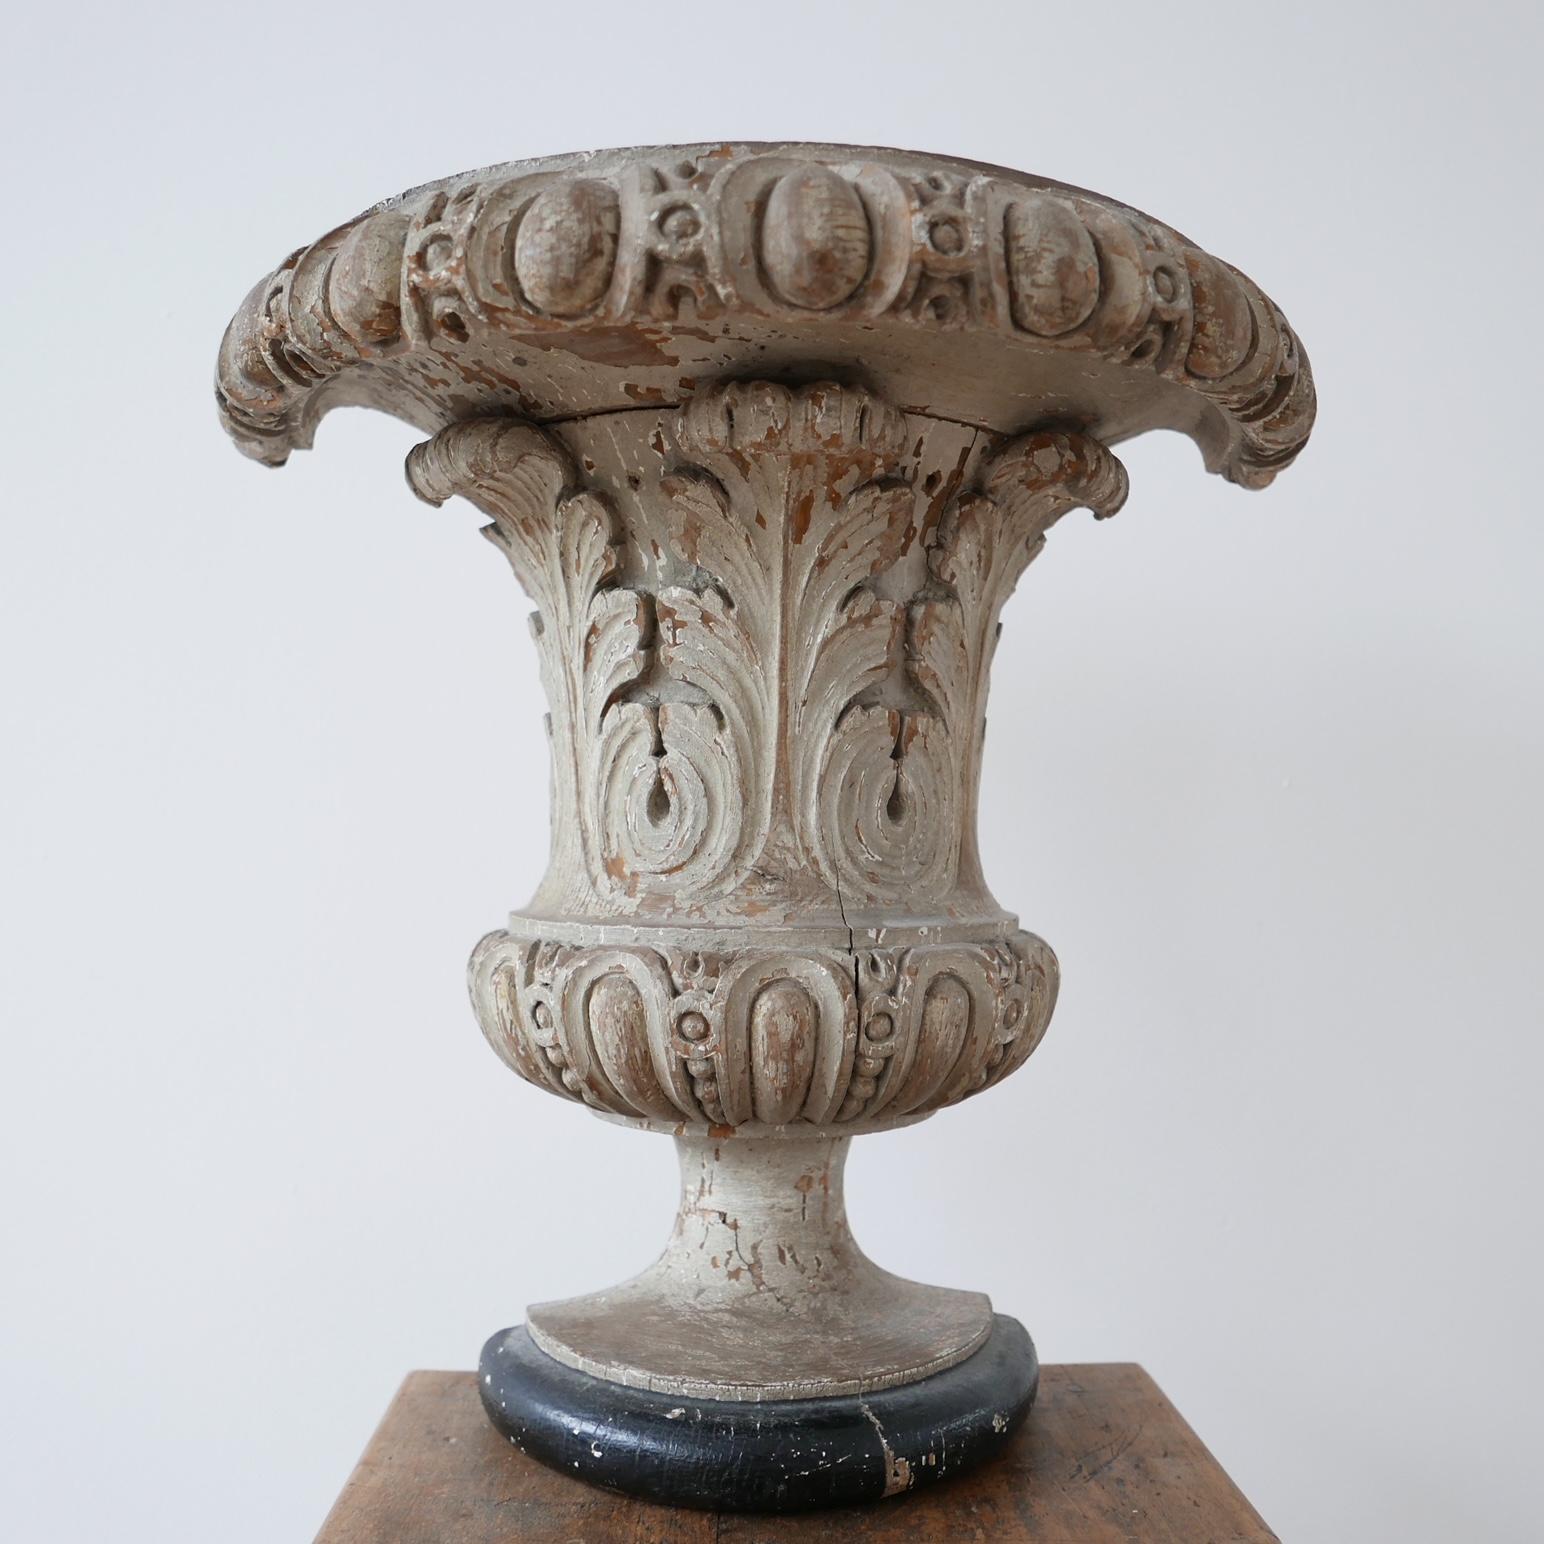 A decorative shelf or plinth in the form of a carved wooden urn.

France, c1930s.

Ideal as a wall hanging itself or to display a small curio or artwork.

Good vintage condition, scuffs and wear commensurate with age.

Location: London Gallery. 